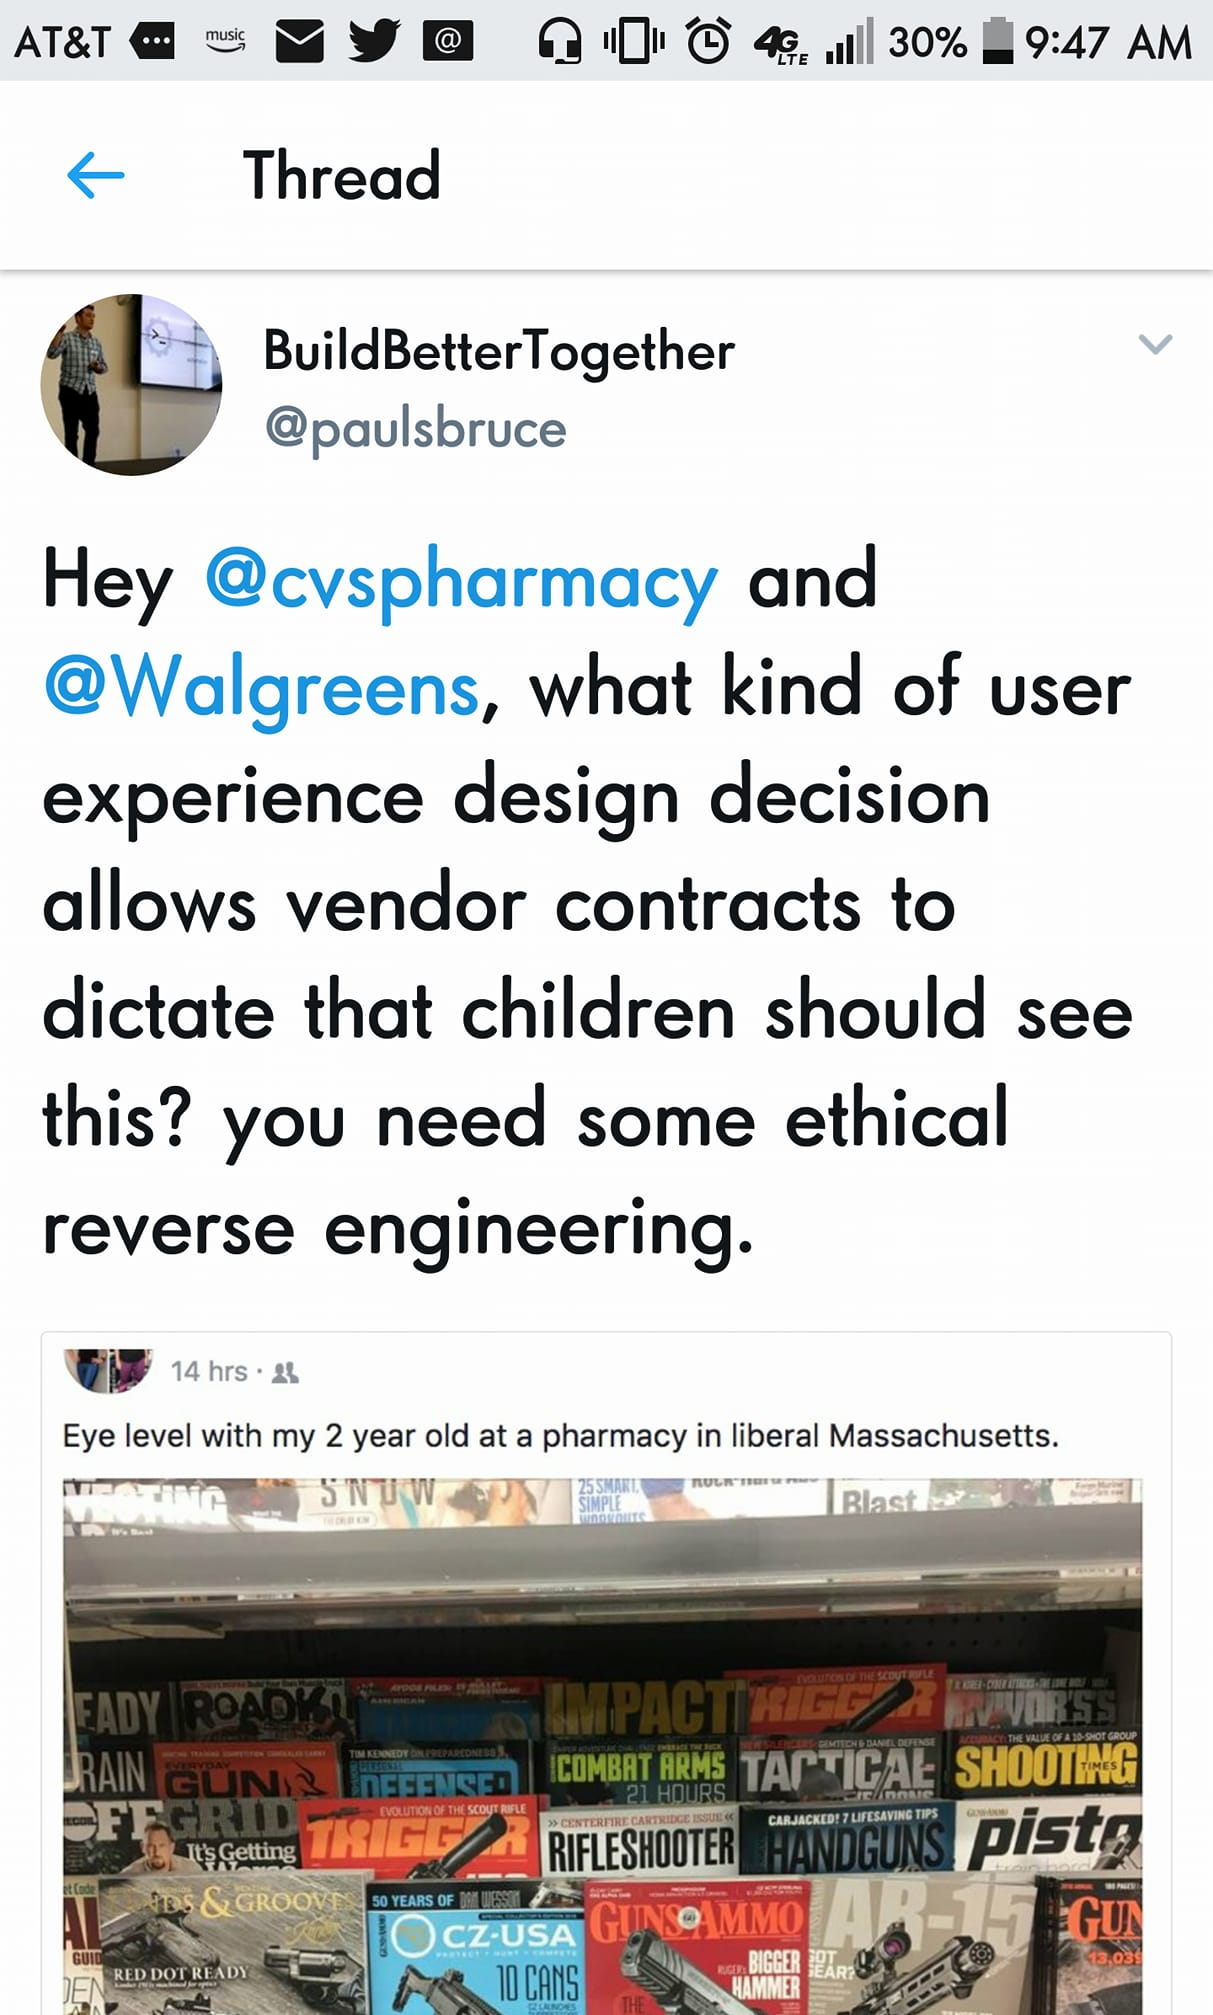 PaulSBruce: "Hey @cvspharmacy and @Walgreens, what kind of user experience design decision allows vendor contracts to dictate that children should see this? you need some ethical reverse engineering." based on neighbor's recent Facebook post of a photo of a full, foot-level rack of gun-related magazines. Neighbor says: "Eye level with my 2 year old at a pharmacy in liberal Massachusetts".